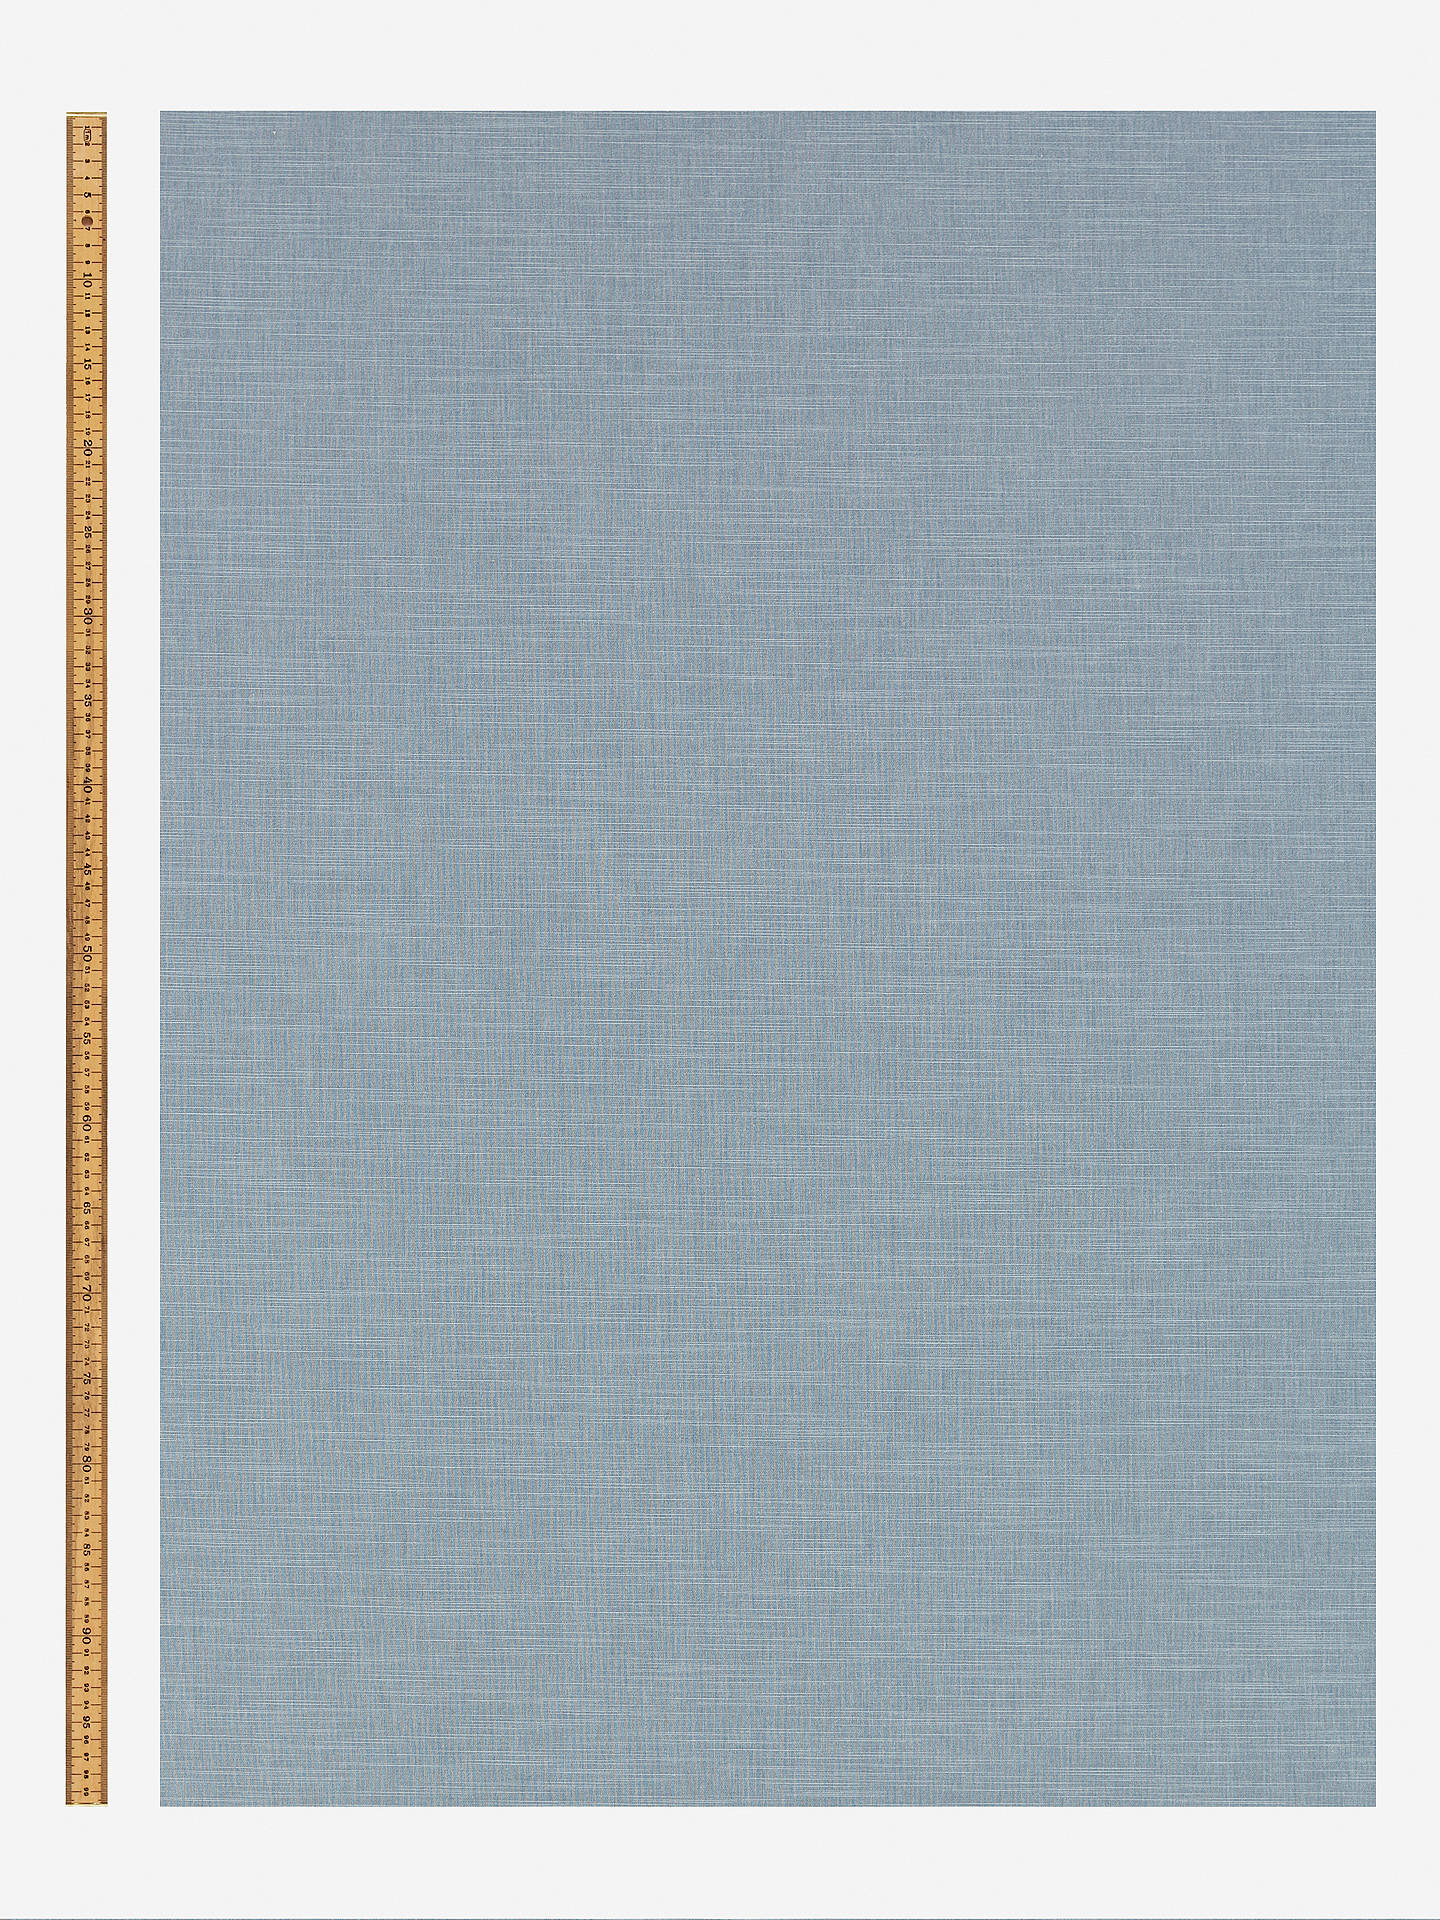 John Lewis Lima Made to Measure Daylight Roller Blind, Cloudy Blue